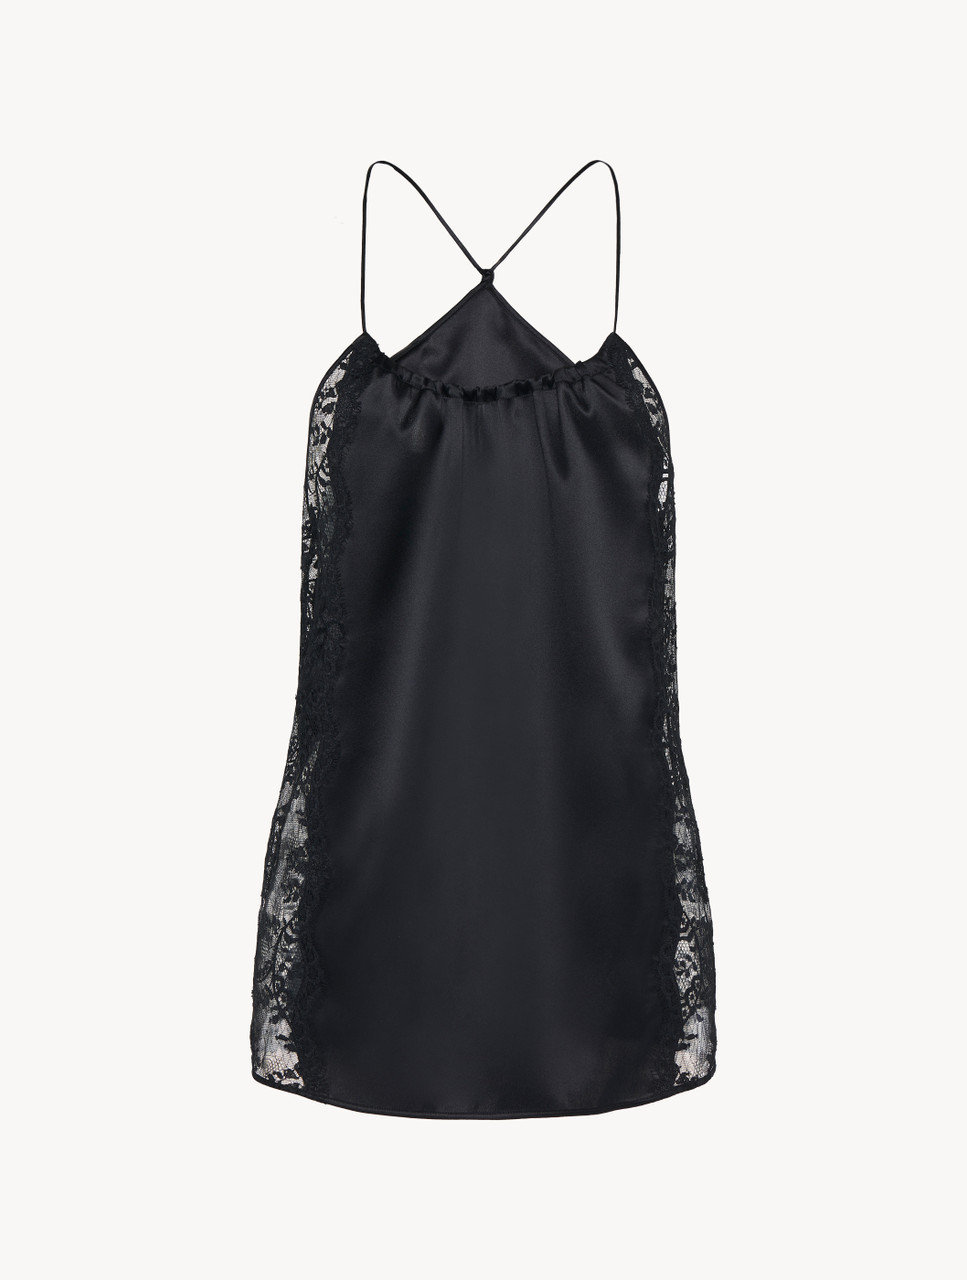 Luxury Halter Silk Camisole in Black with Leavers Lace